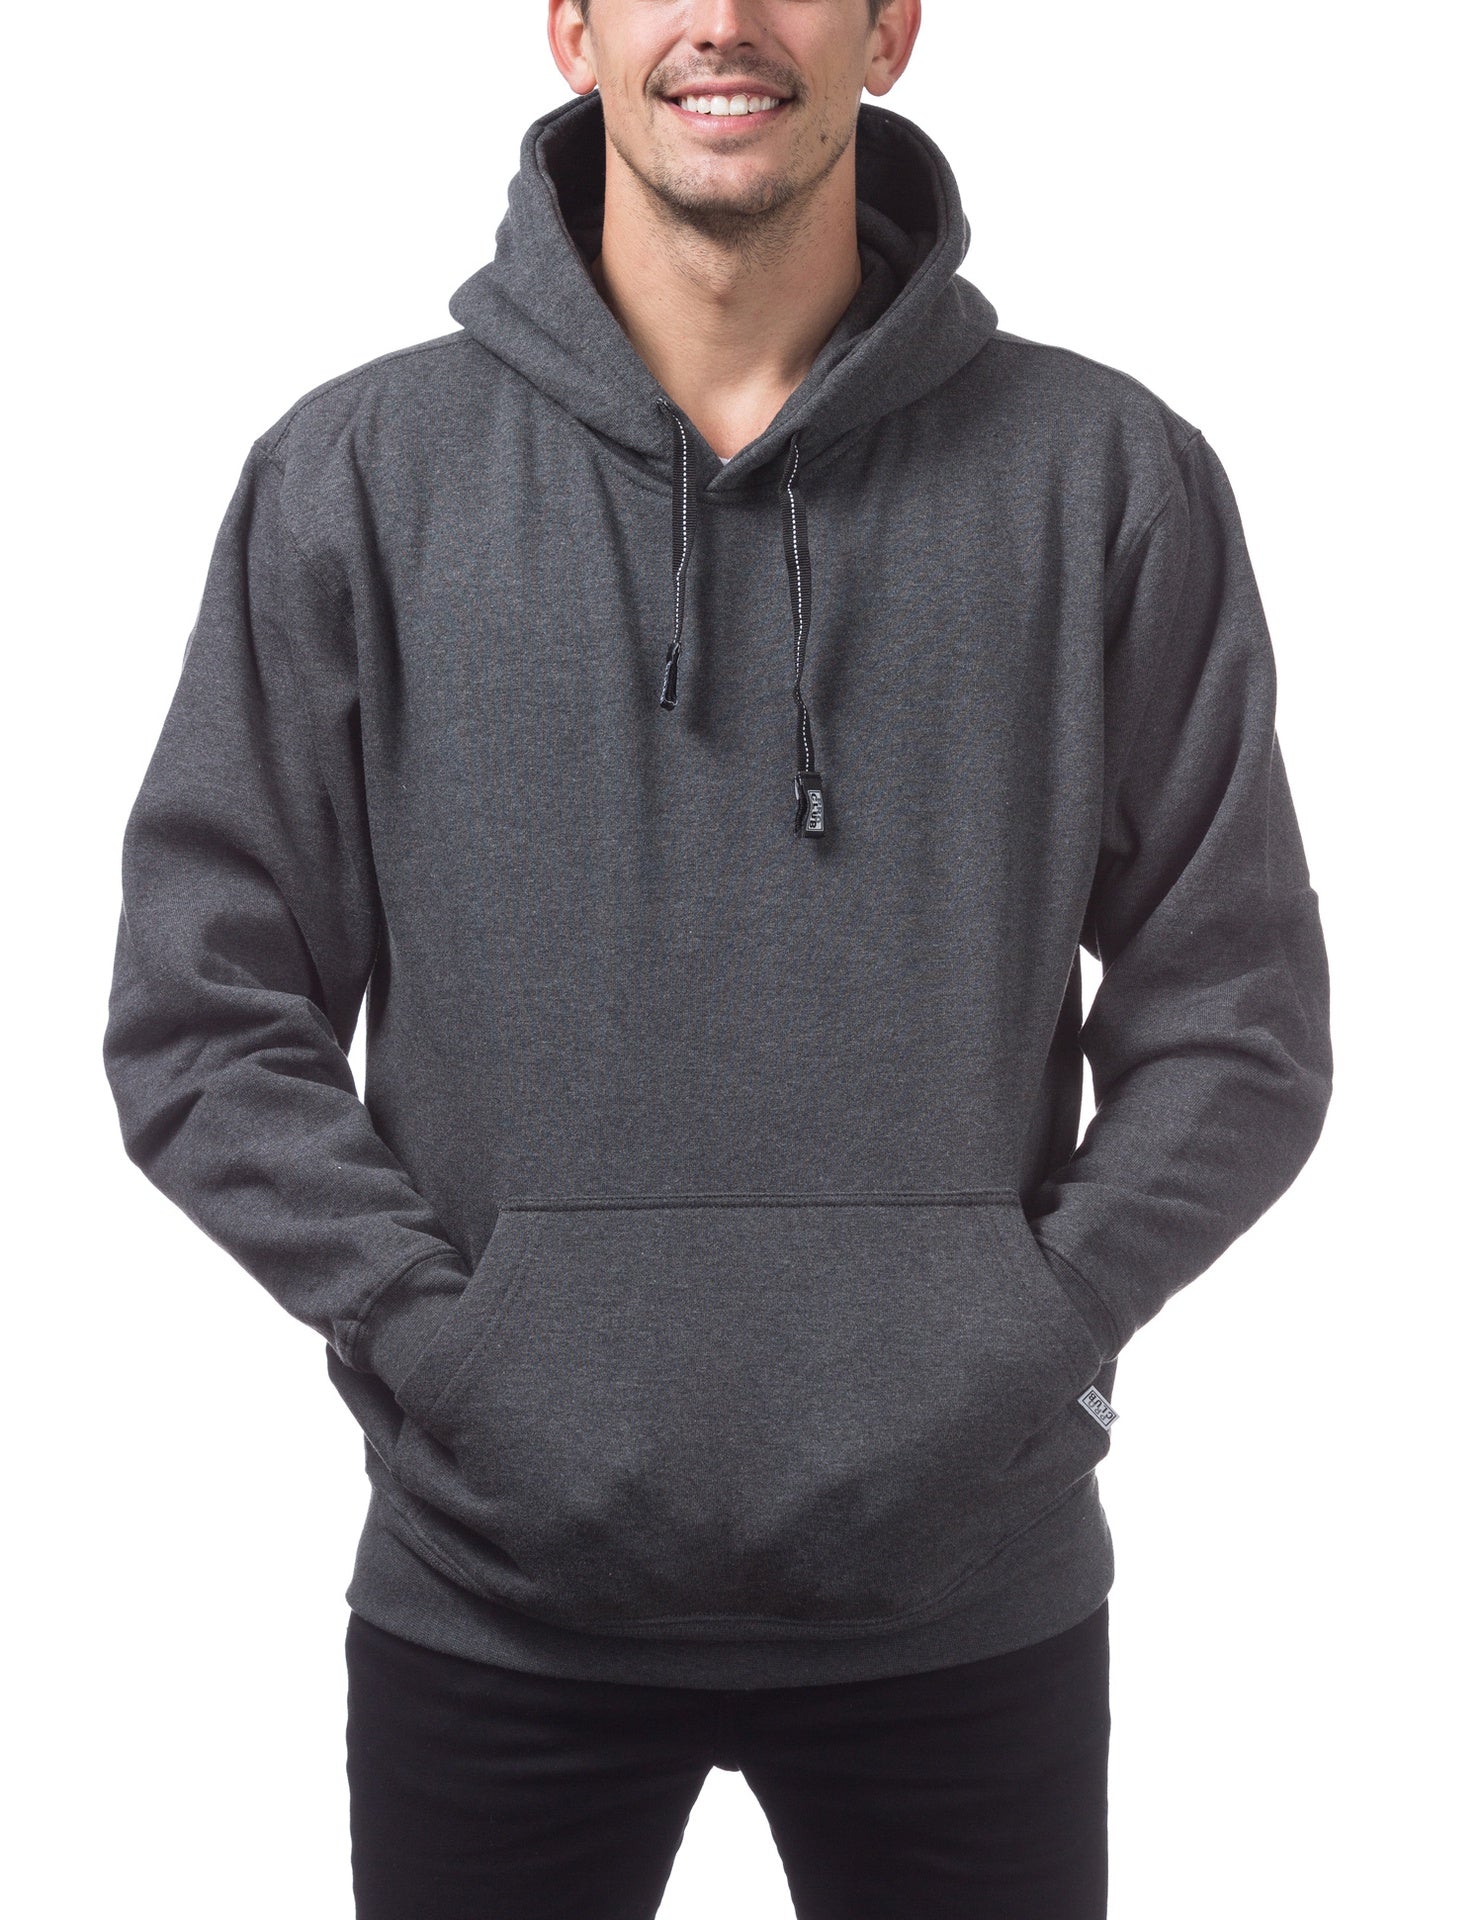 Pro Club Heavyweight Pullover Hoodie (13oz) - CHARCOAL